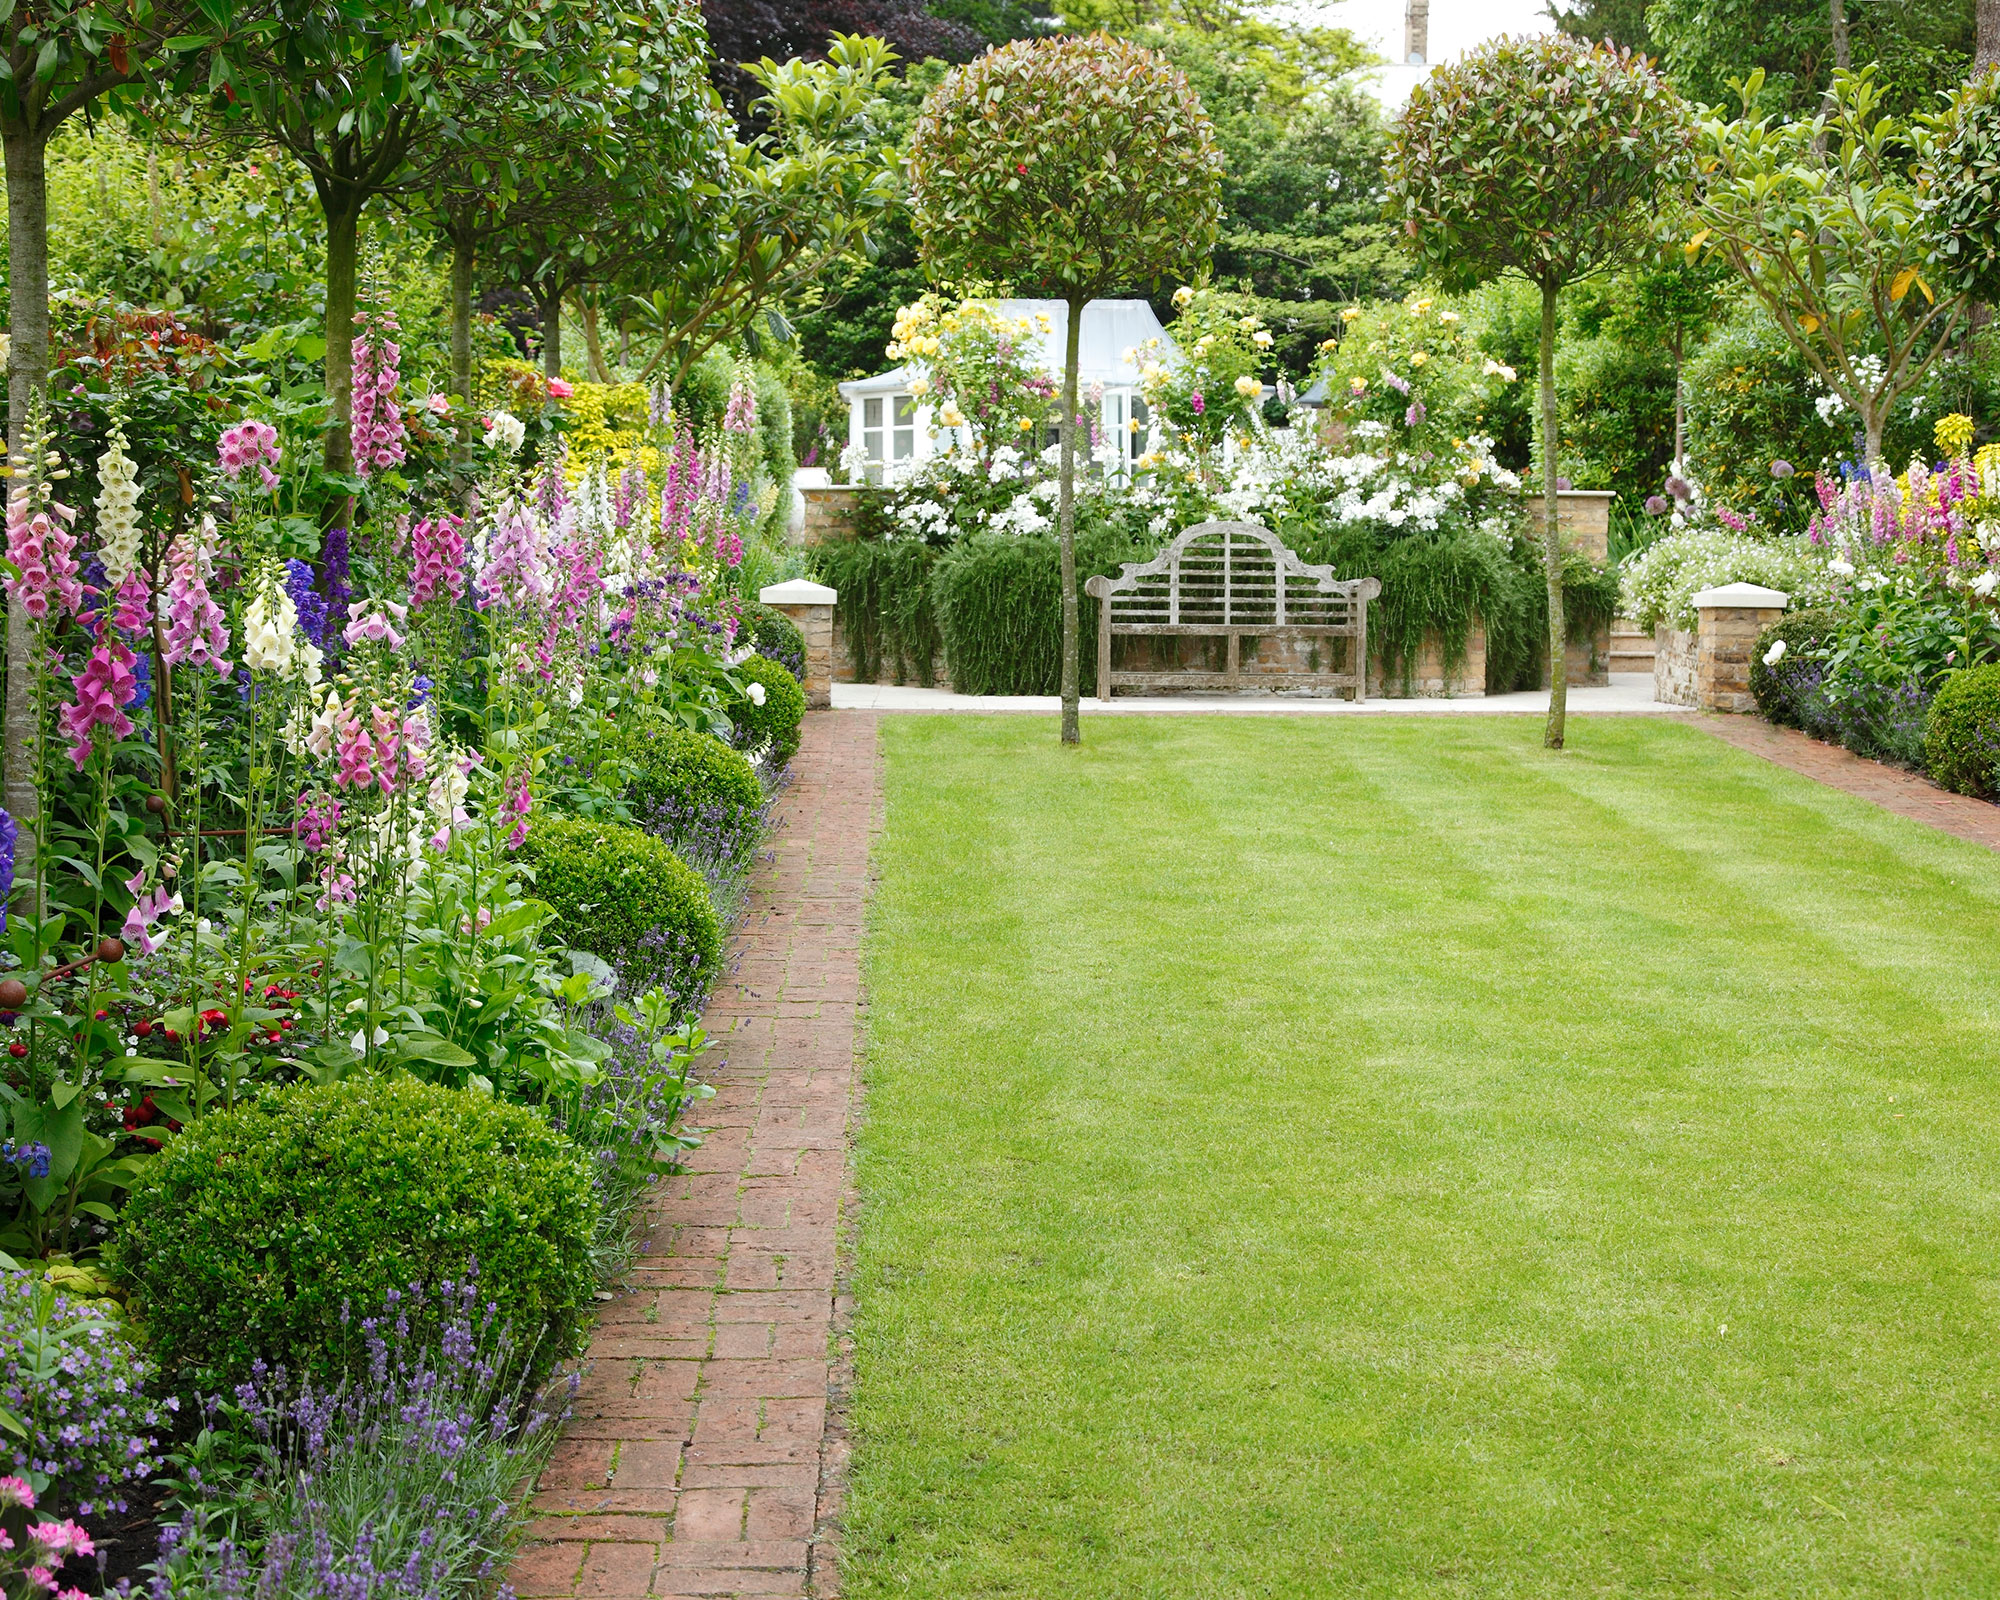 How Much Does A Garden Designer Cost, How Much Does Landscaping Pay An Hour